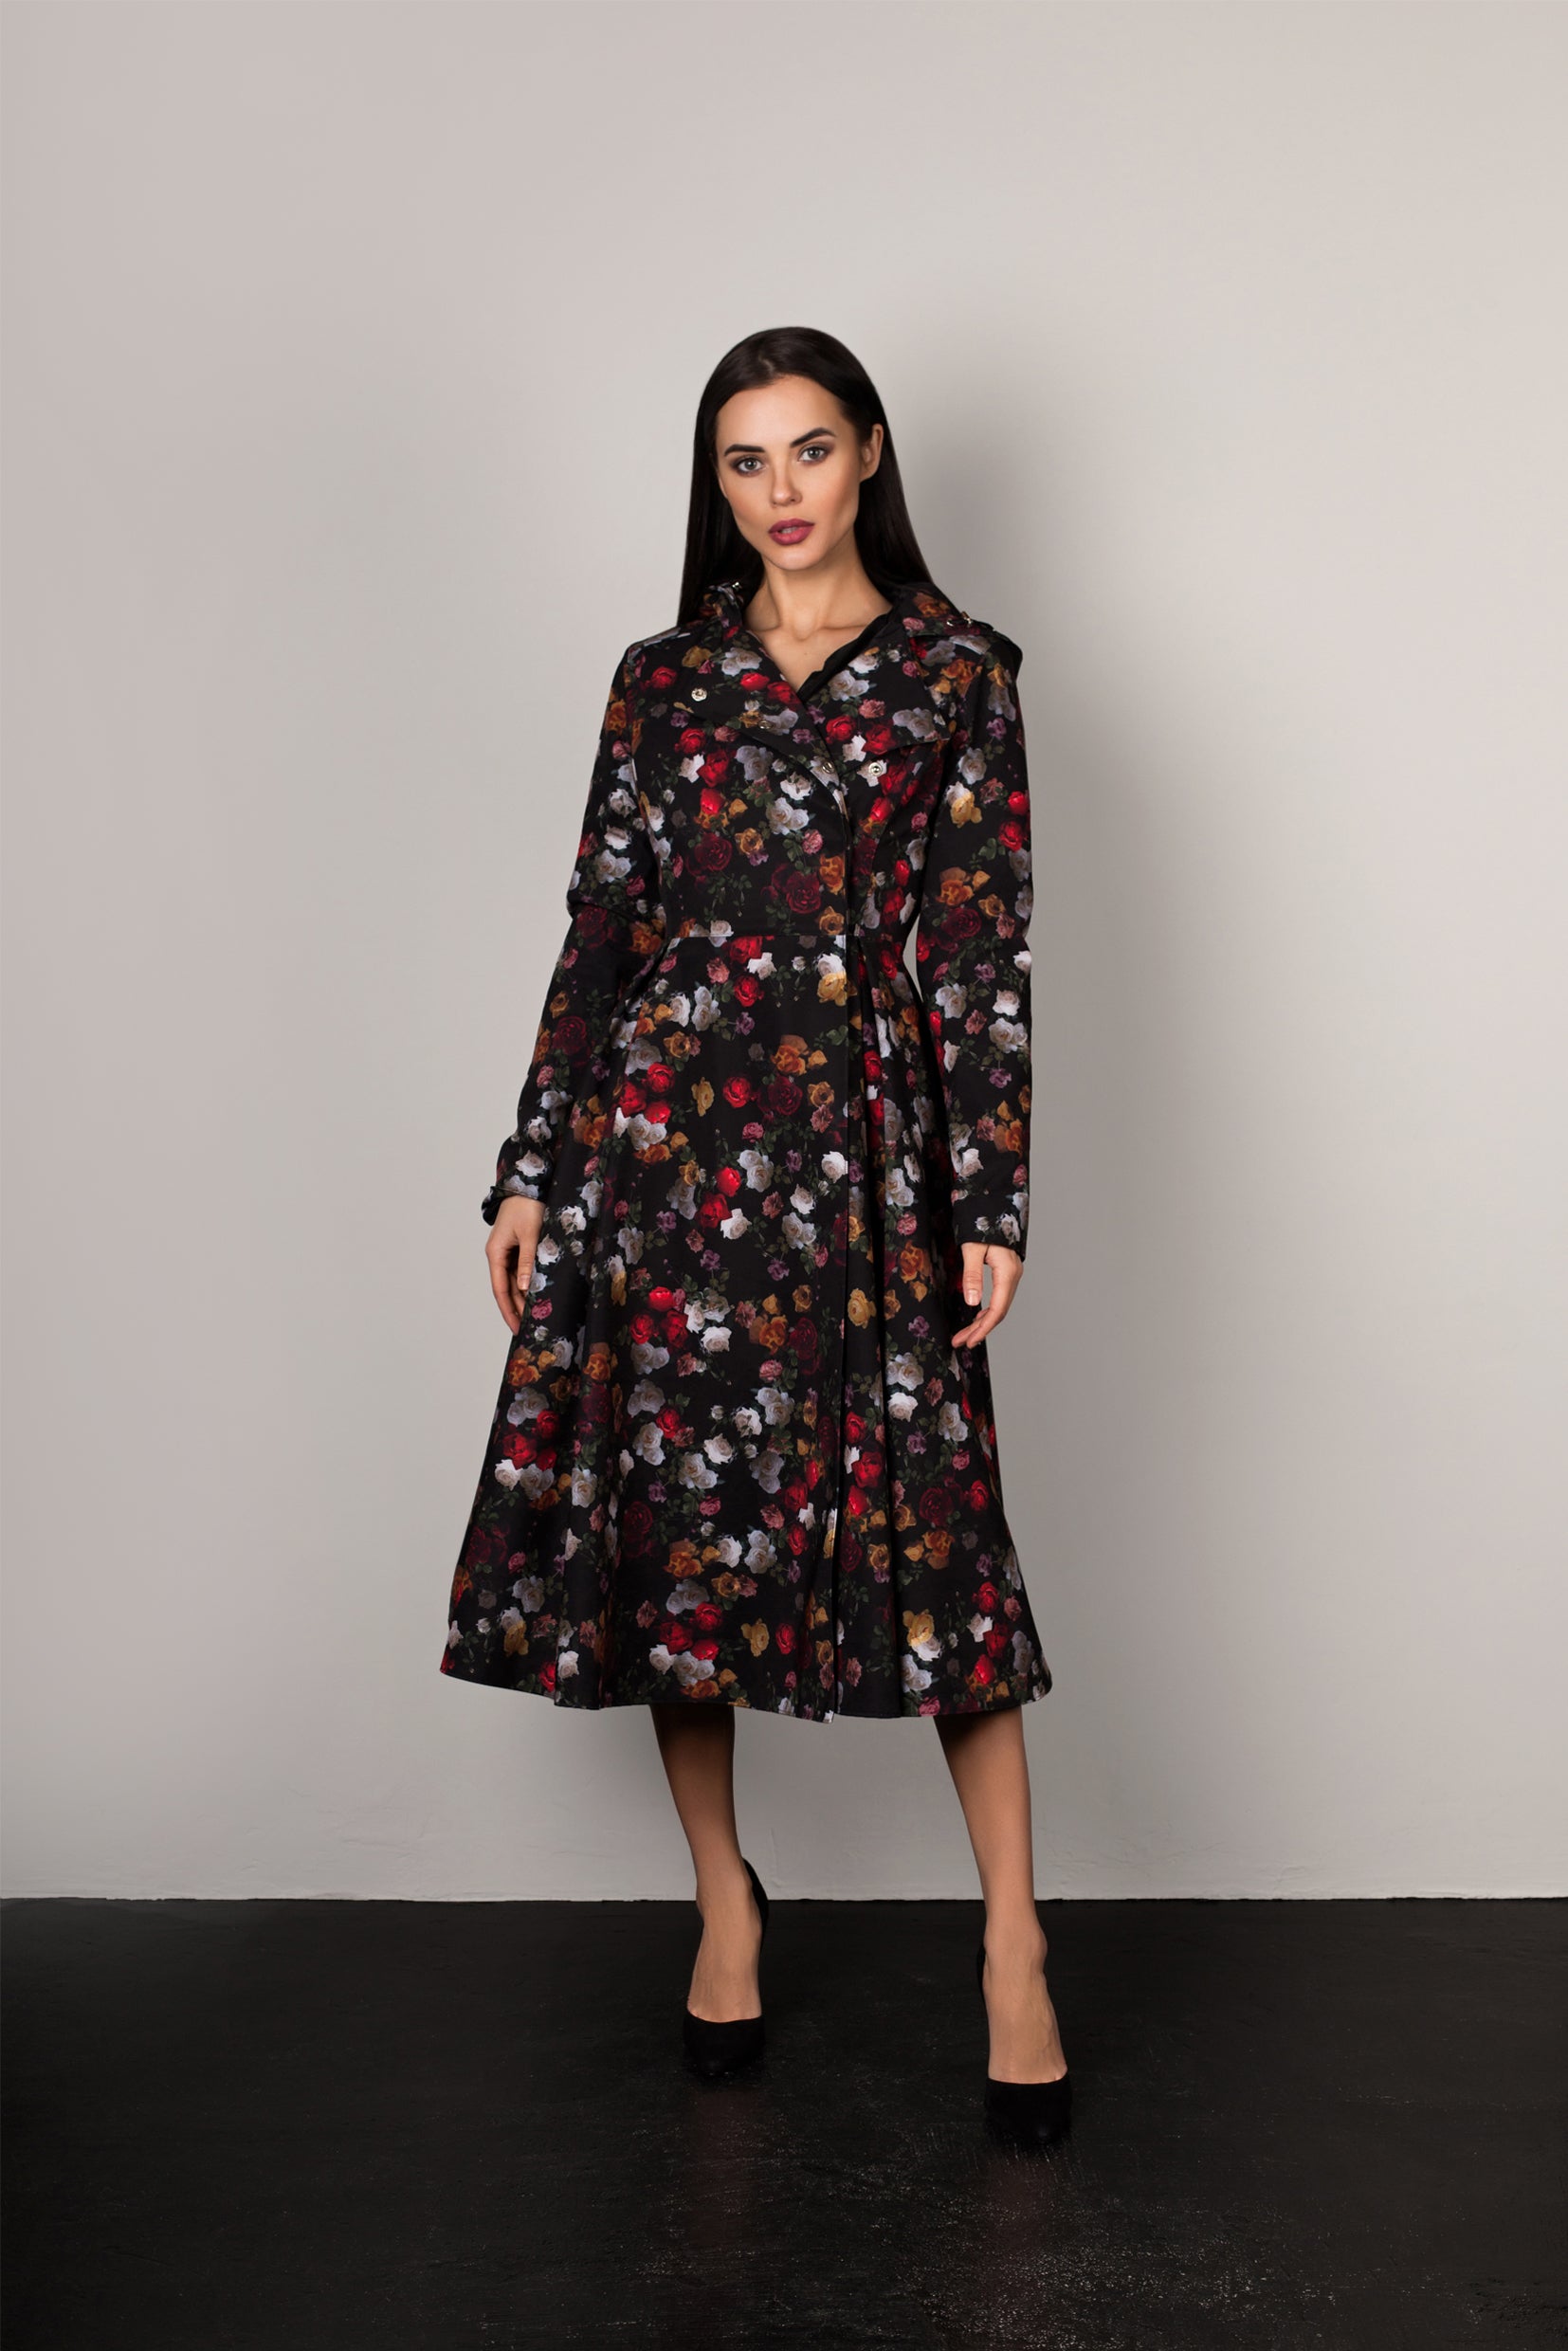 Waterproof Women's Long Double Breasted Peacoat with Rose Flower Print